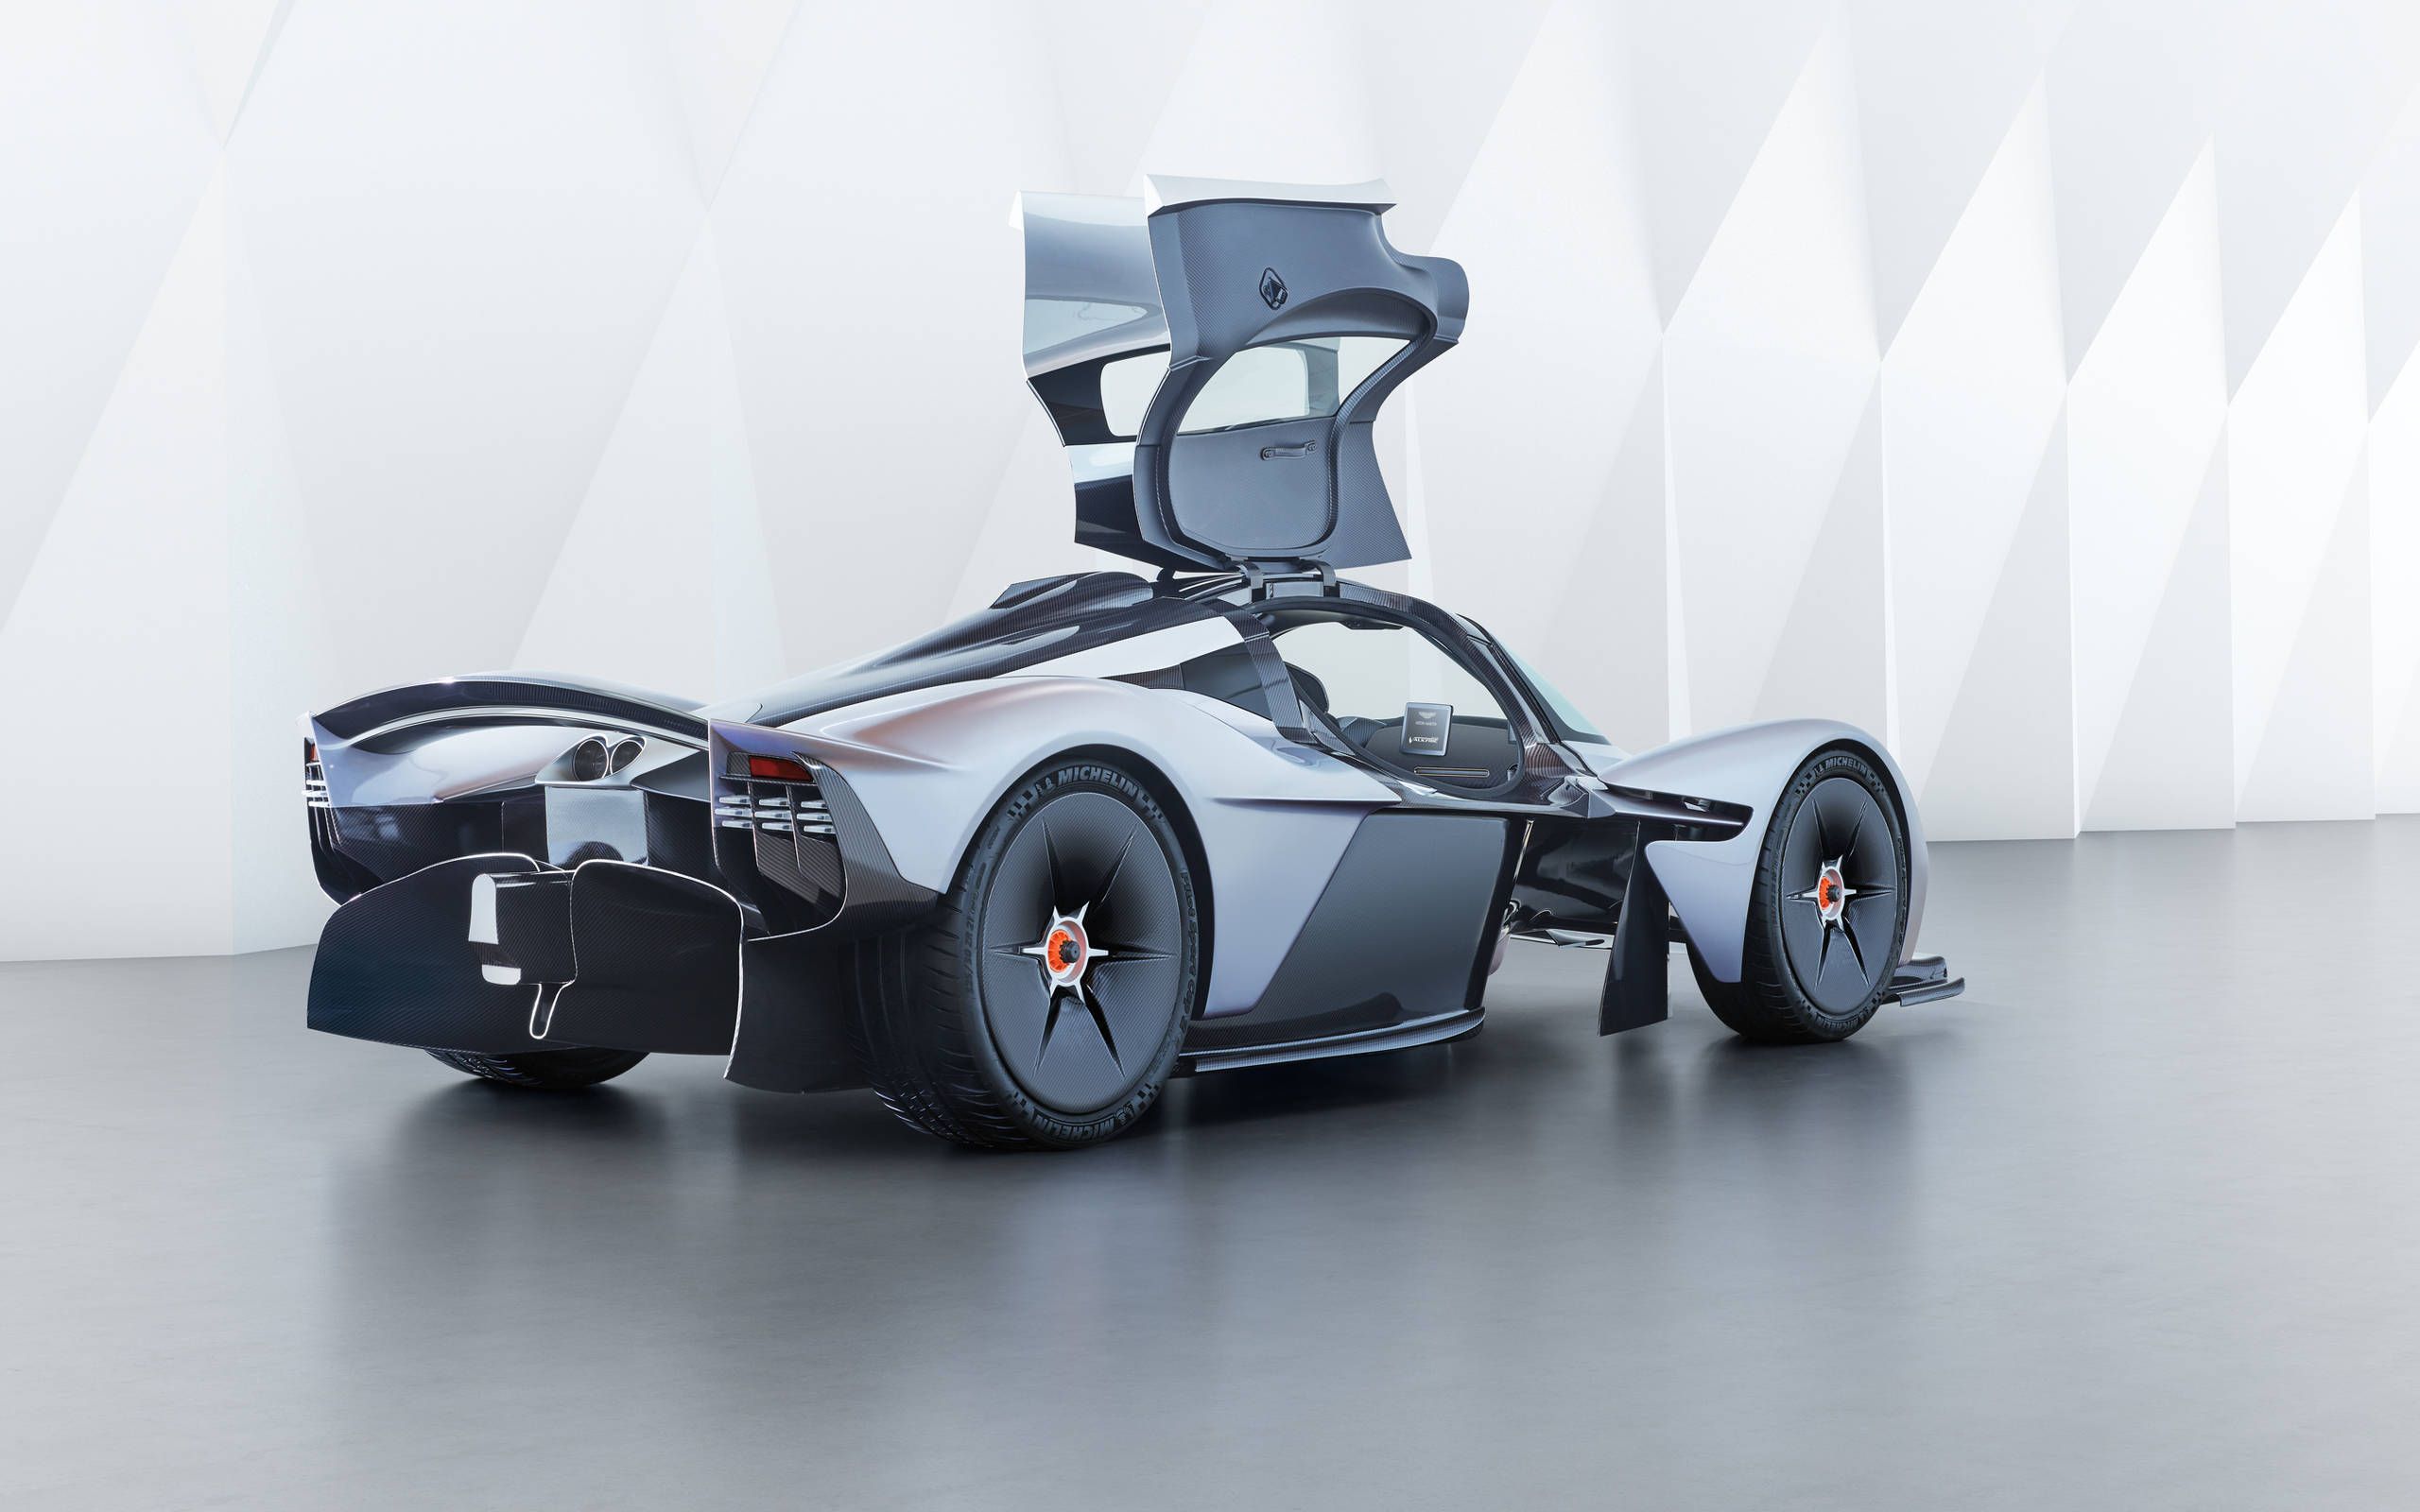 bao mike tyson surprised the world by giving serena williams a super rare aston martin valkyrie when she won the title of greatest tennis player of all time 6535897fbed40 Mike Tyson Surprised The World By Giving Serena Williams A Super Rare Aston Martin Valkyrie When She Won The Title Of Greatest Tennis Player Of All Time.